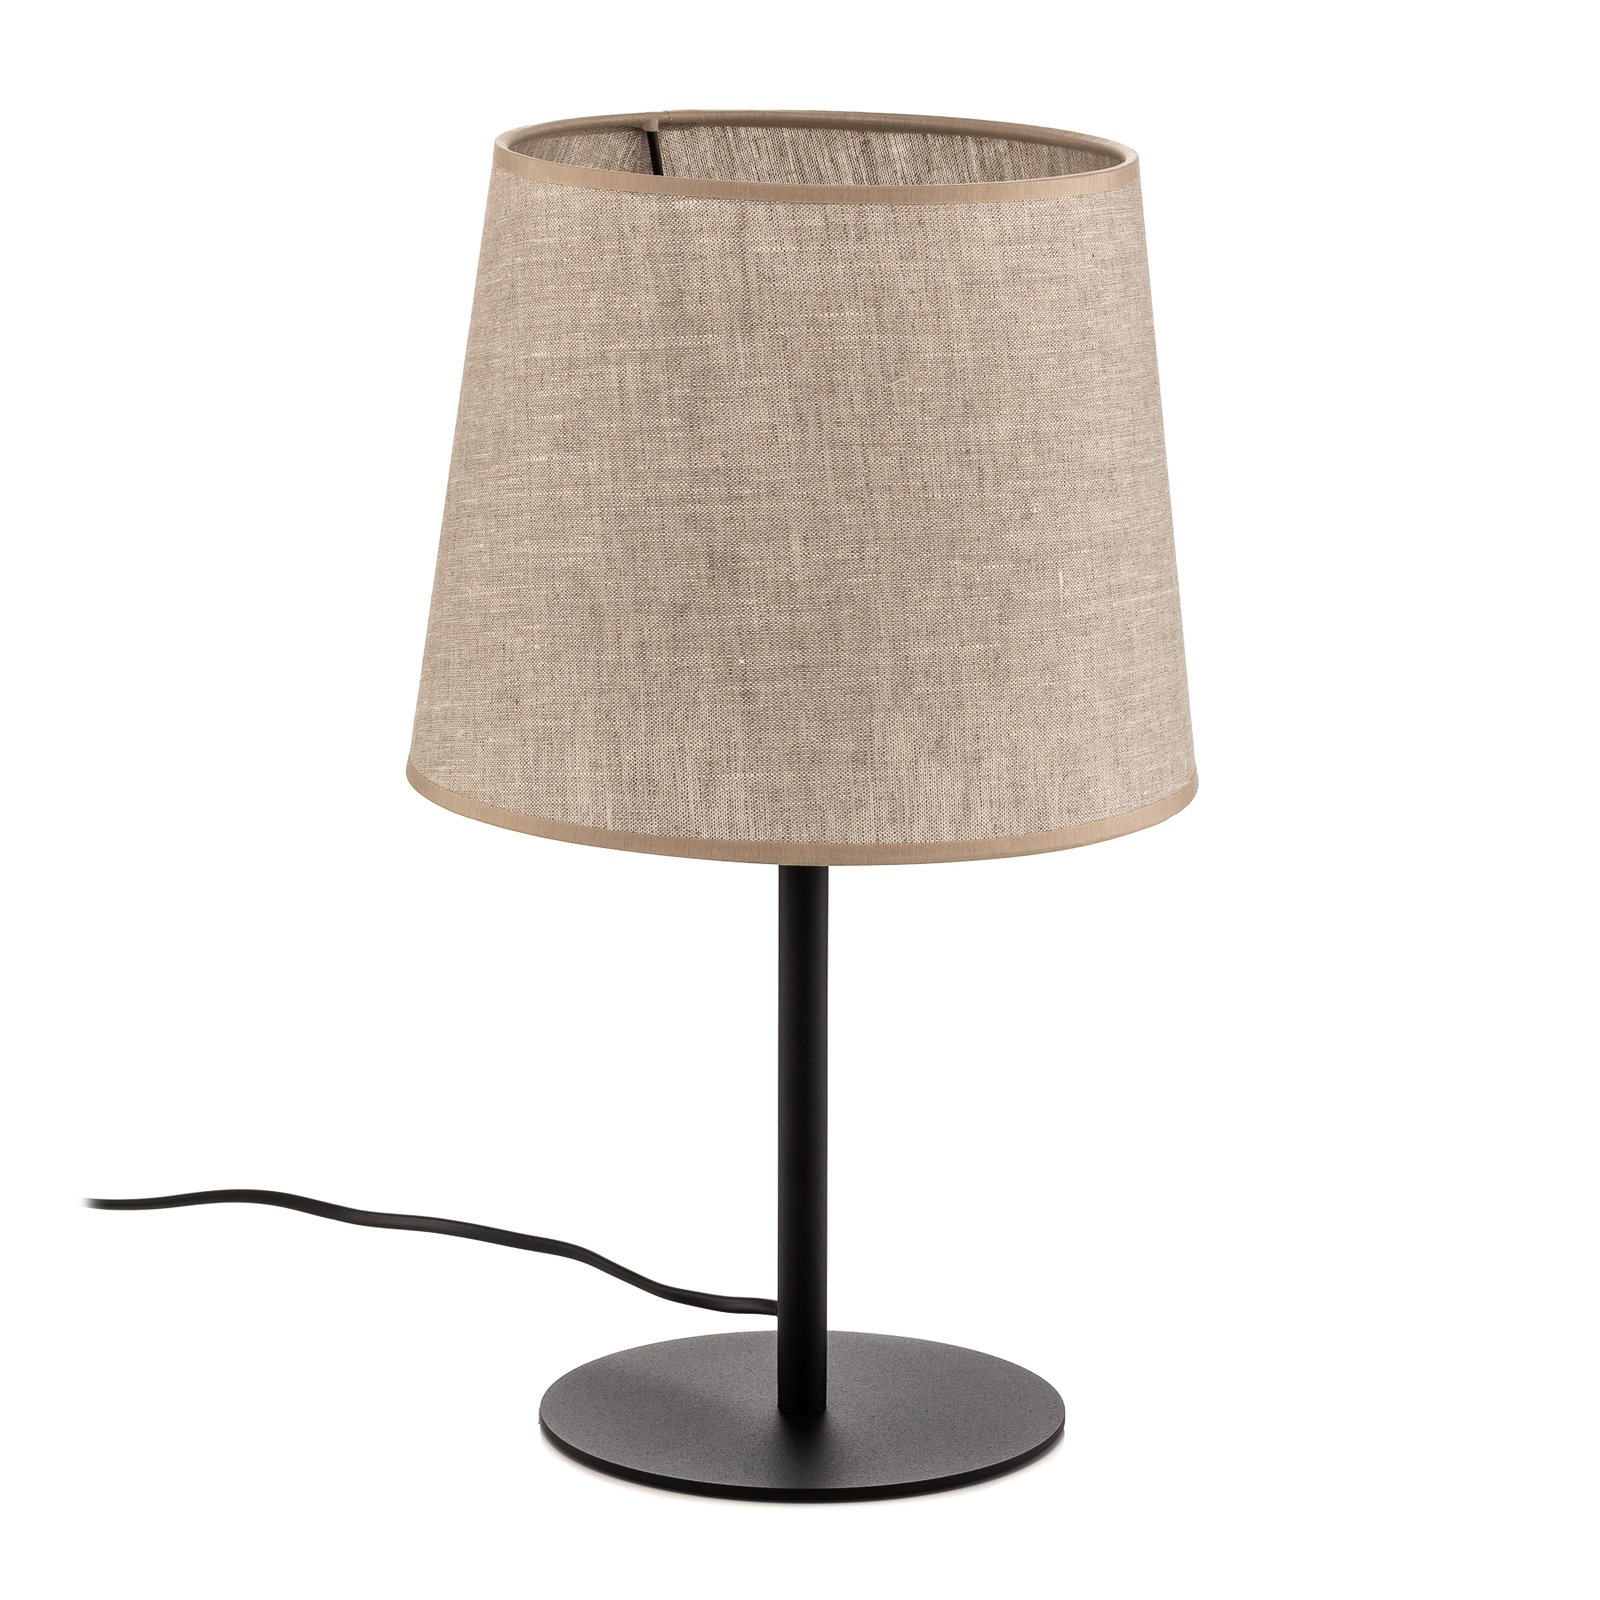 Chicago table lamp with linen lampshade